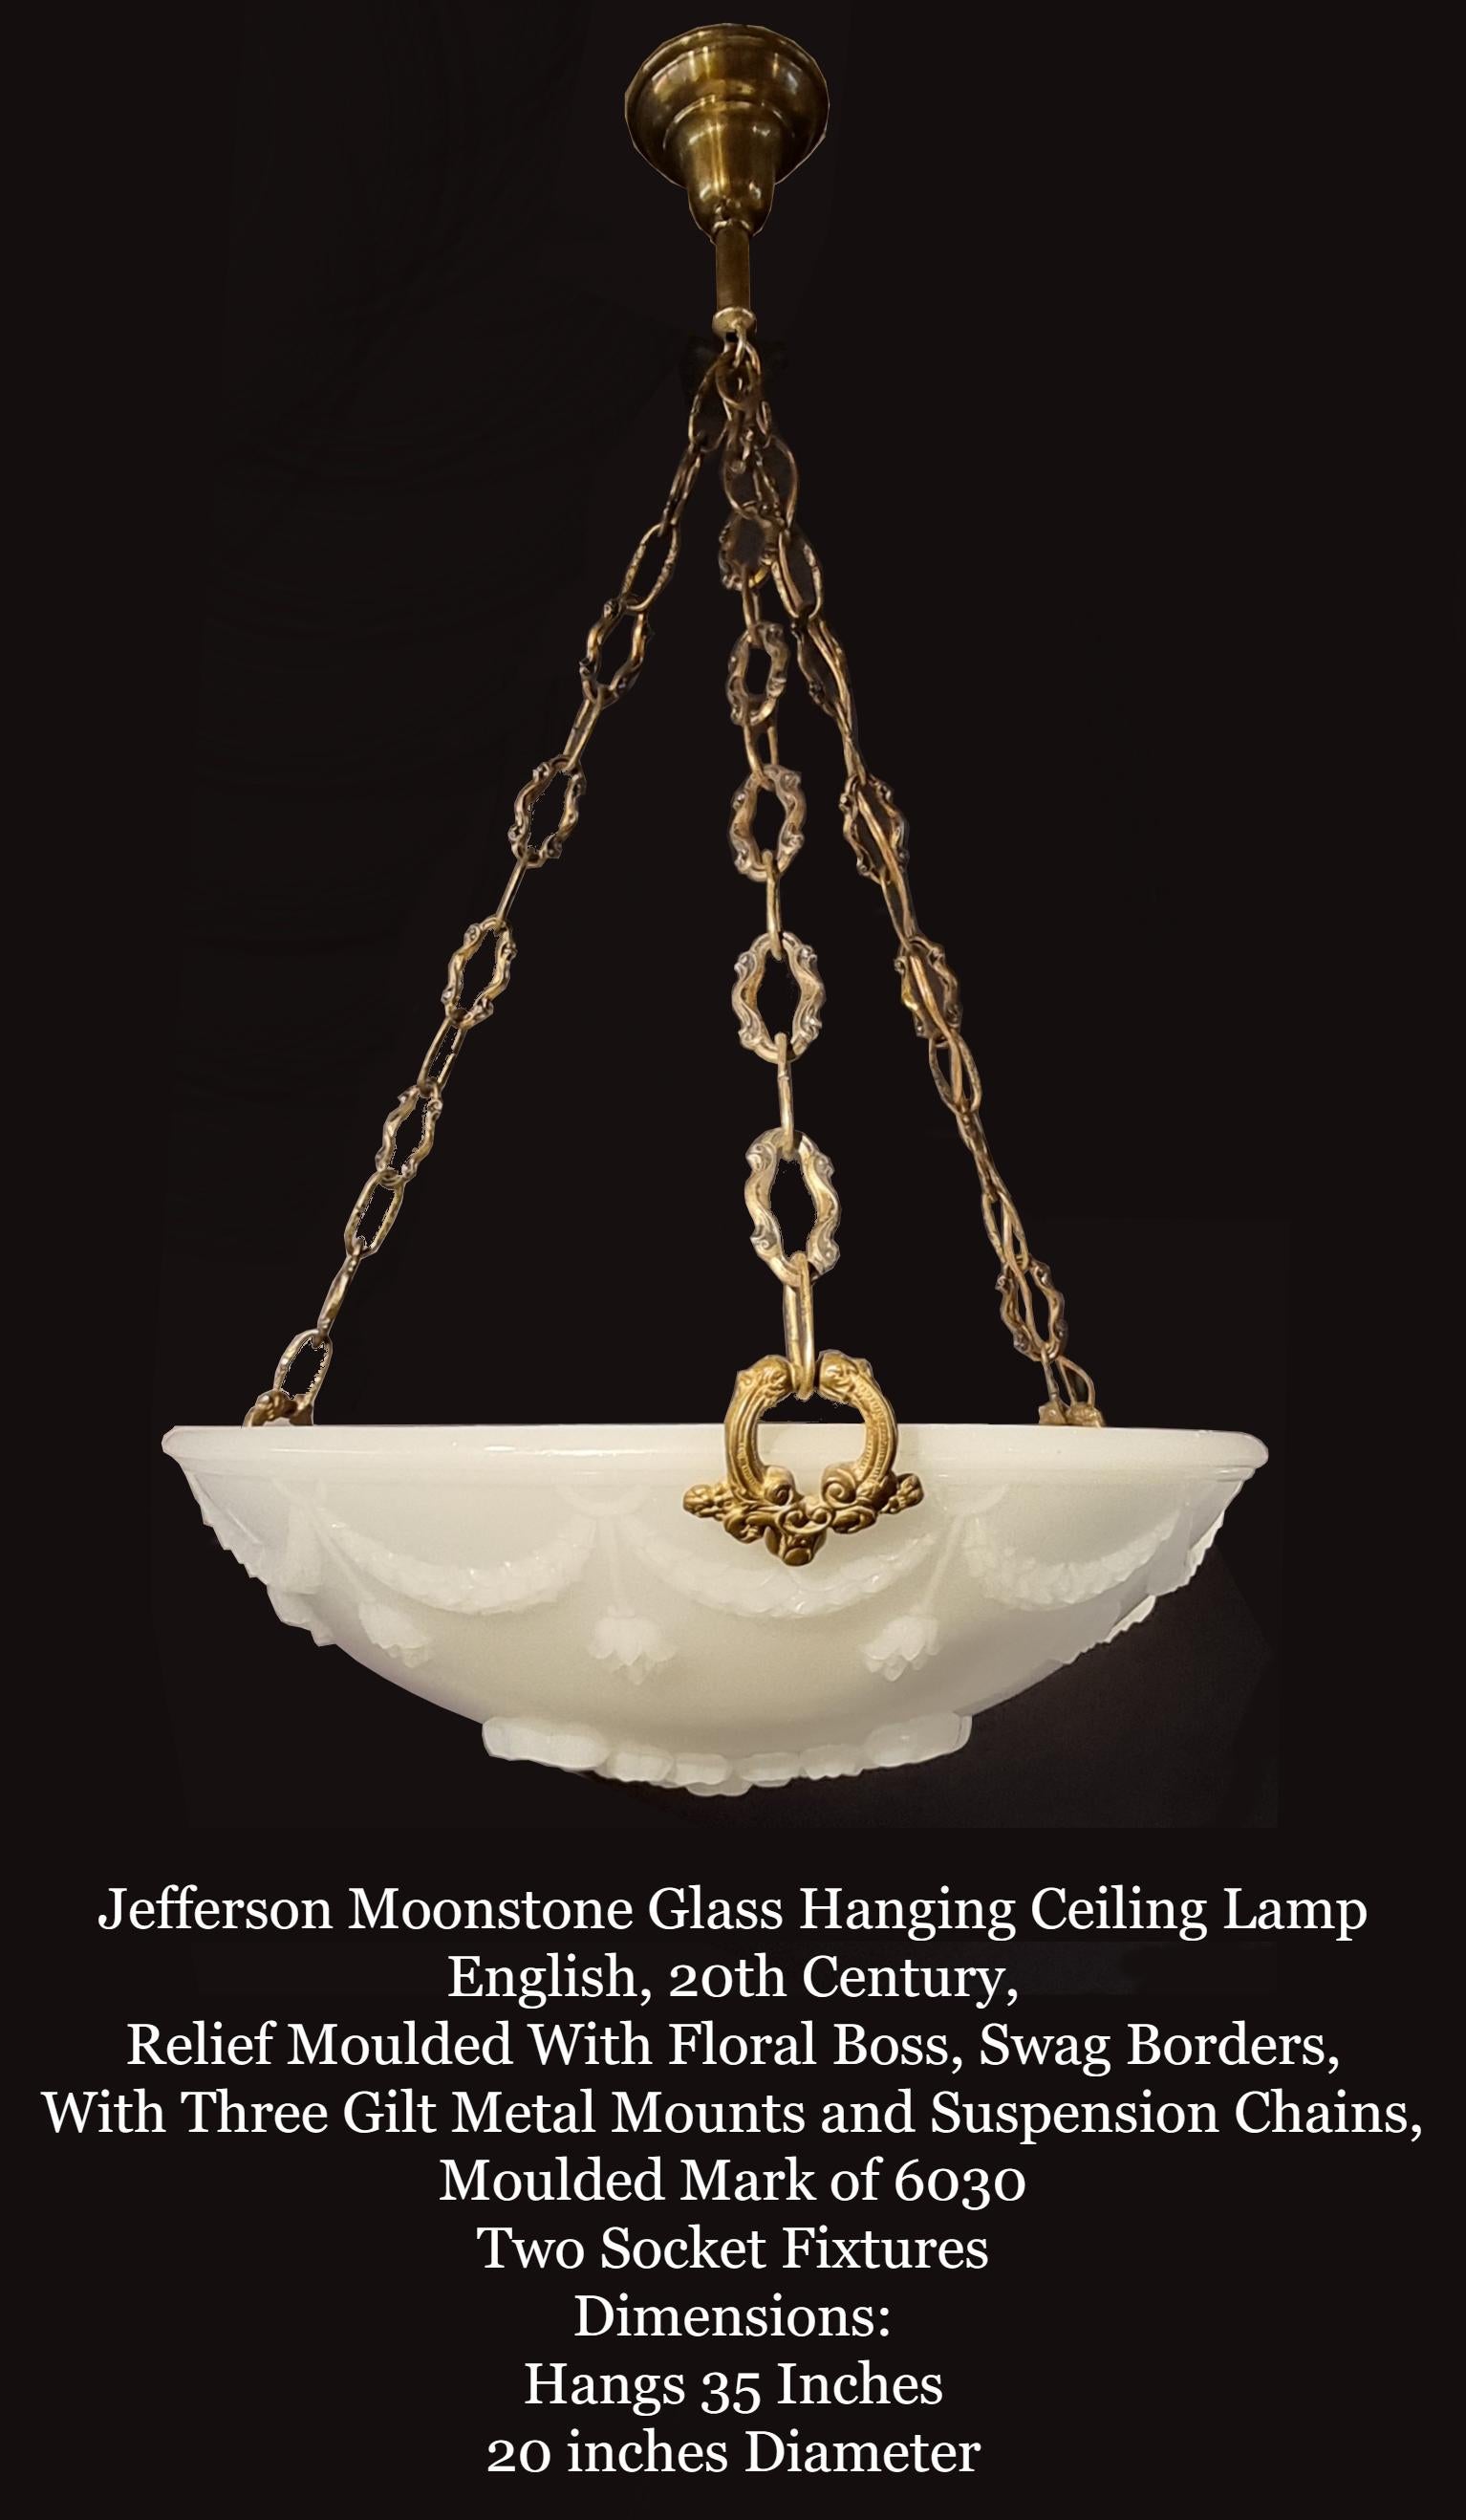 Jefferson Moonstone Glass Hanging Ceiling Lamp English, 20th Century In Good Condition For Sale In Ottawa, Ontario